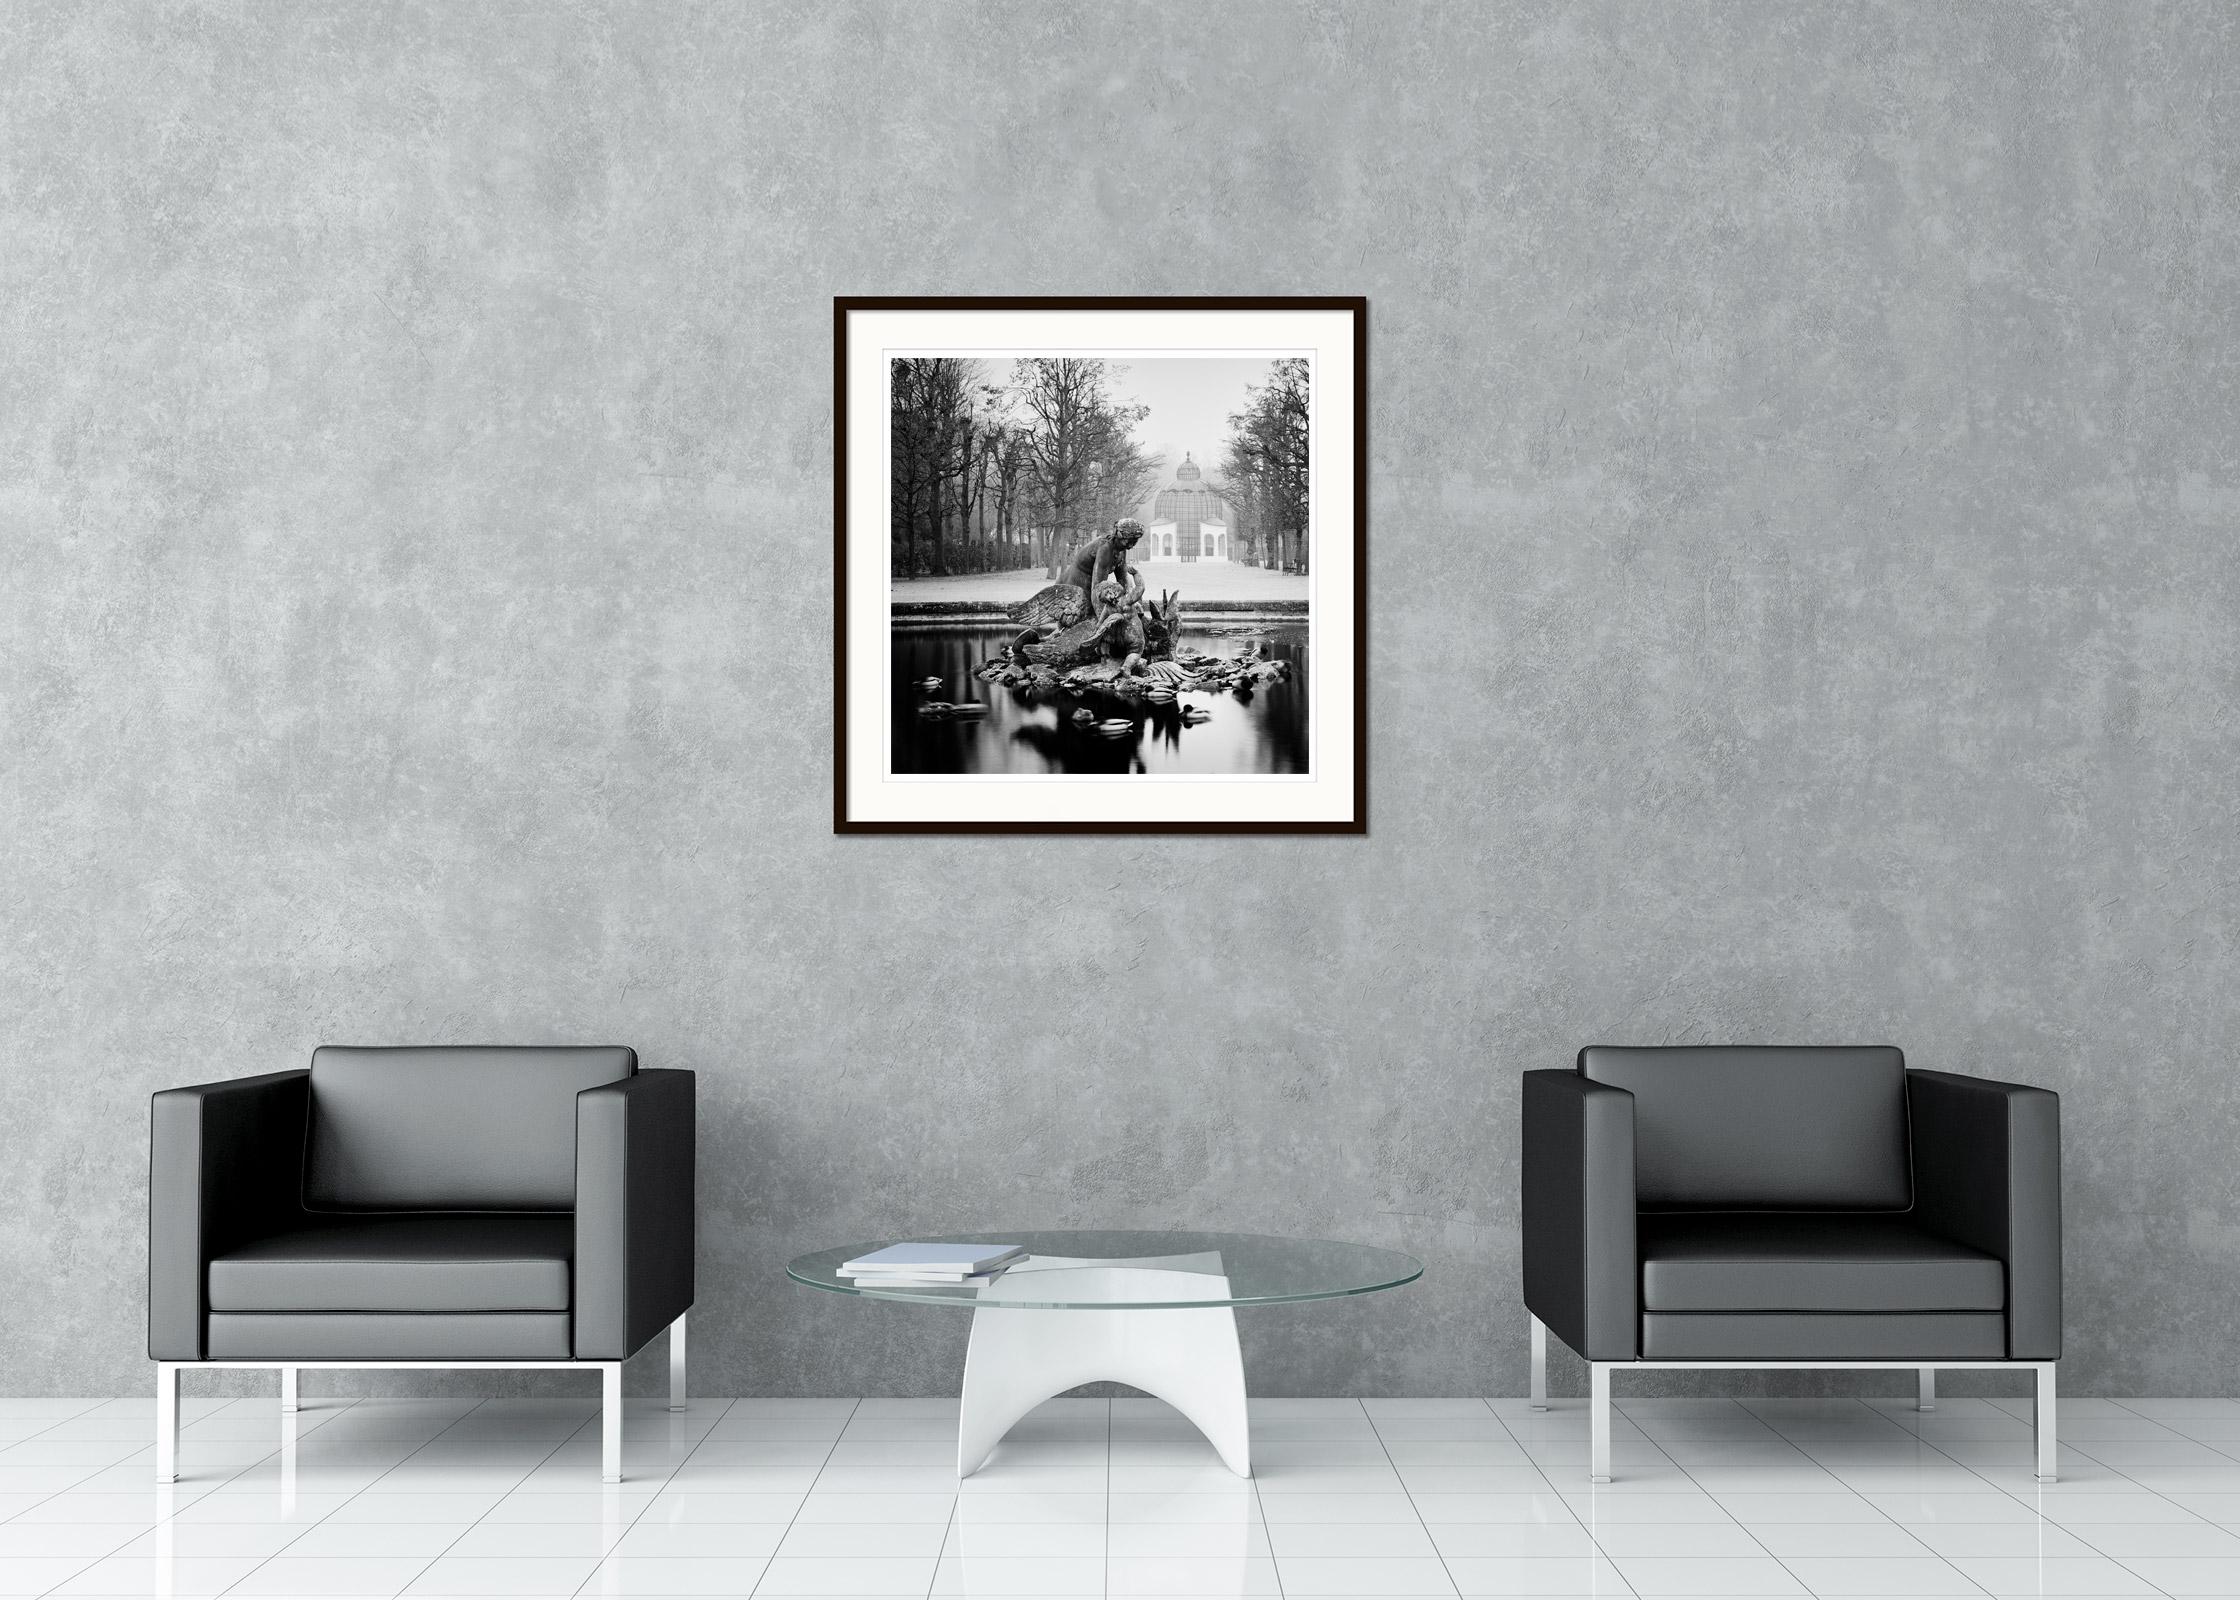 Black and White Fine Art cityscape – landscape photography. Najadenbrunnen towards the Columbary in the park of Schoenbrunn Palace, Vienna, Austria. Archival pigment ink print, edition of 9. Signed, titled, dated and numbered by artist. Certificate